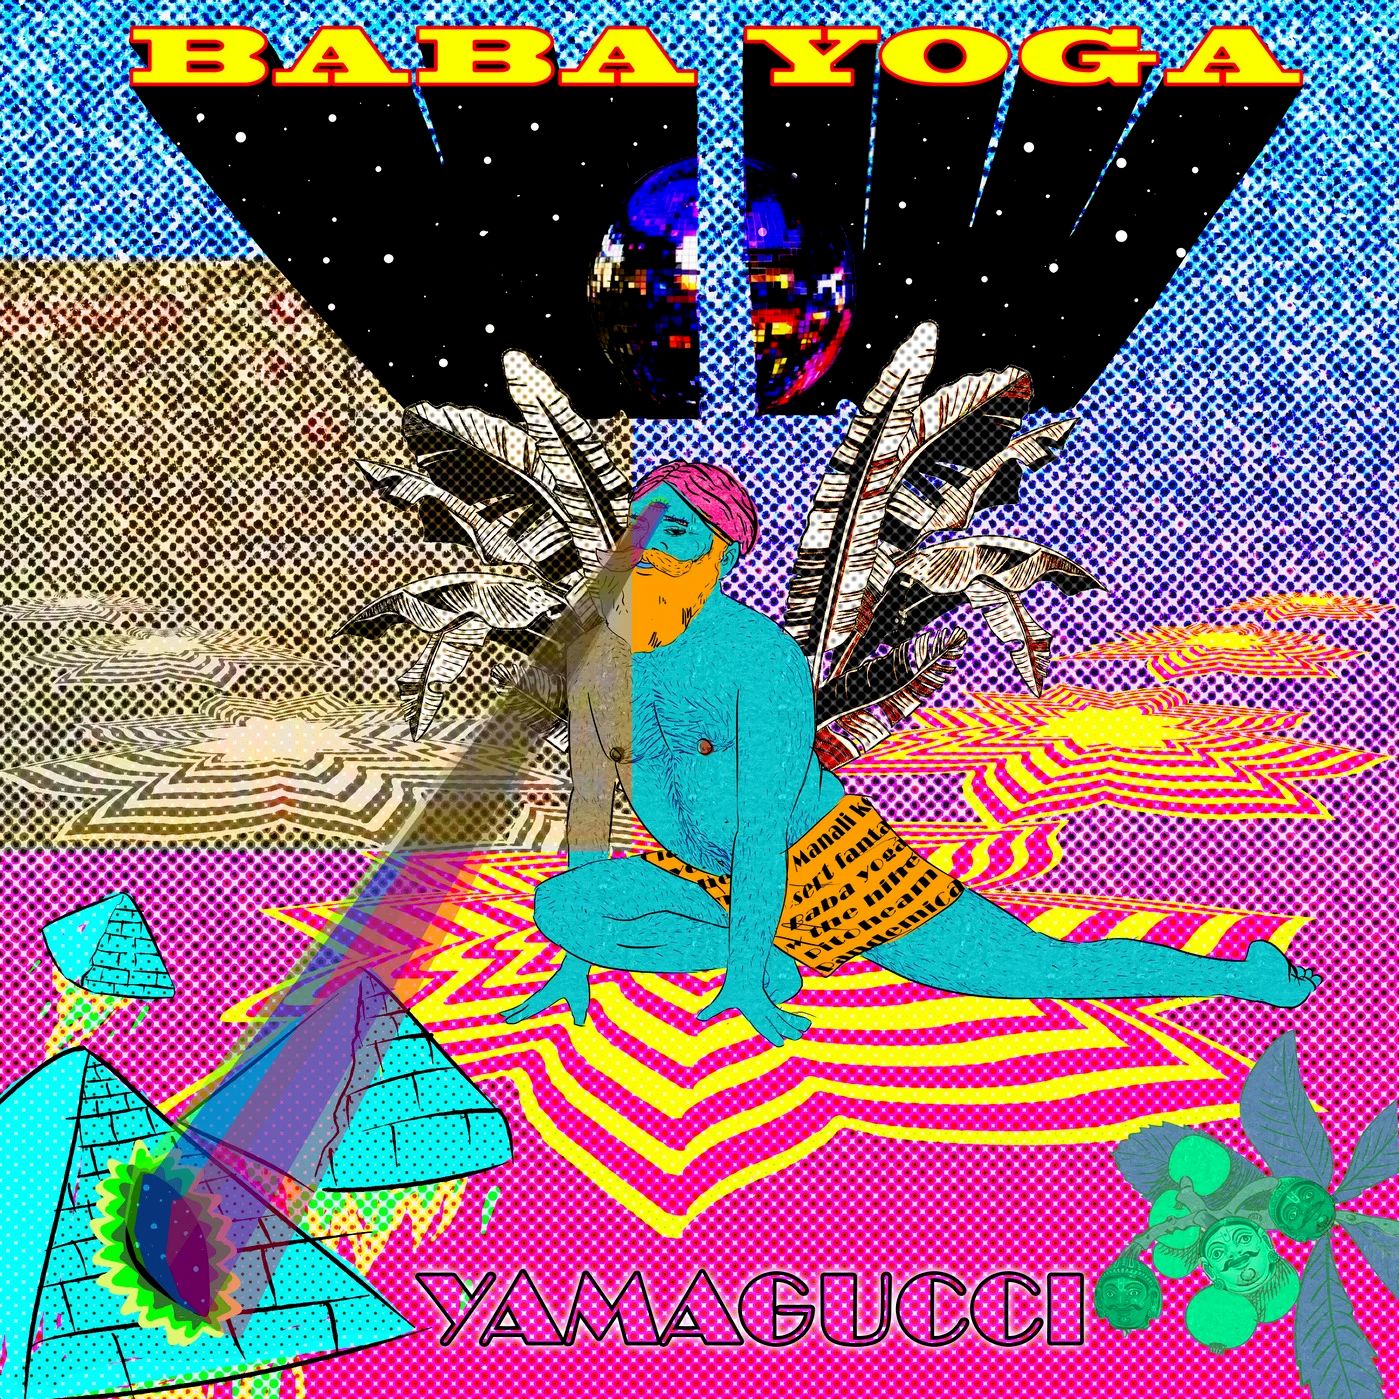 I-download Yamagucci - Omer Relex